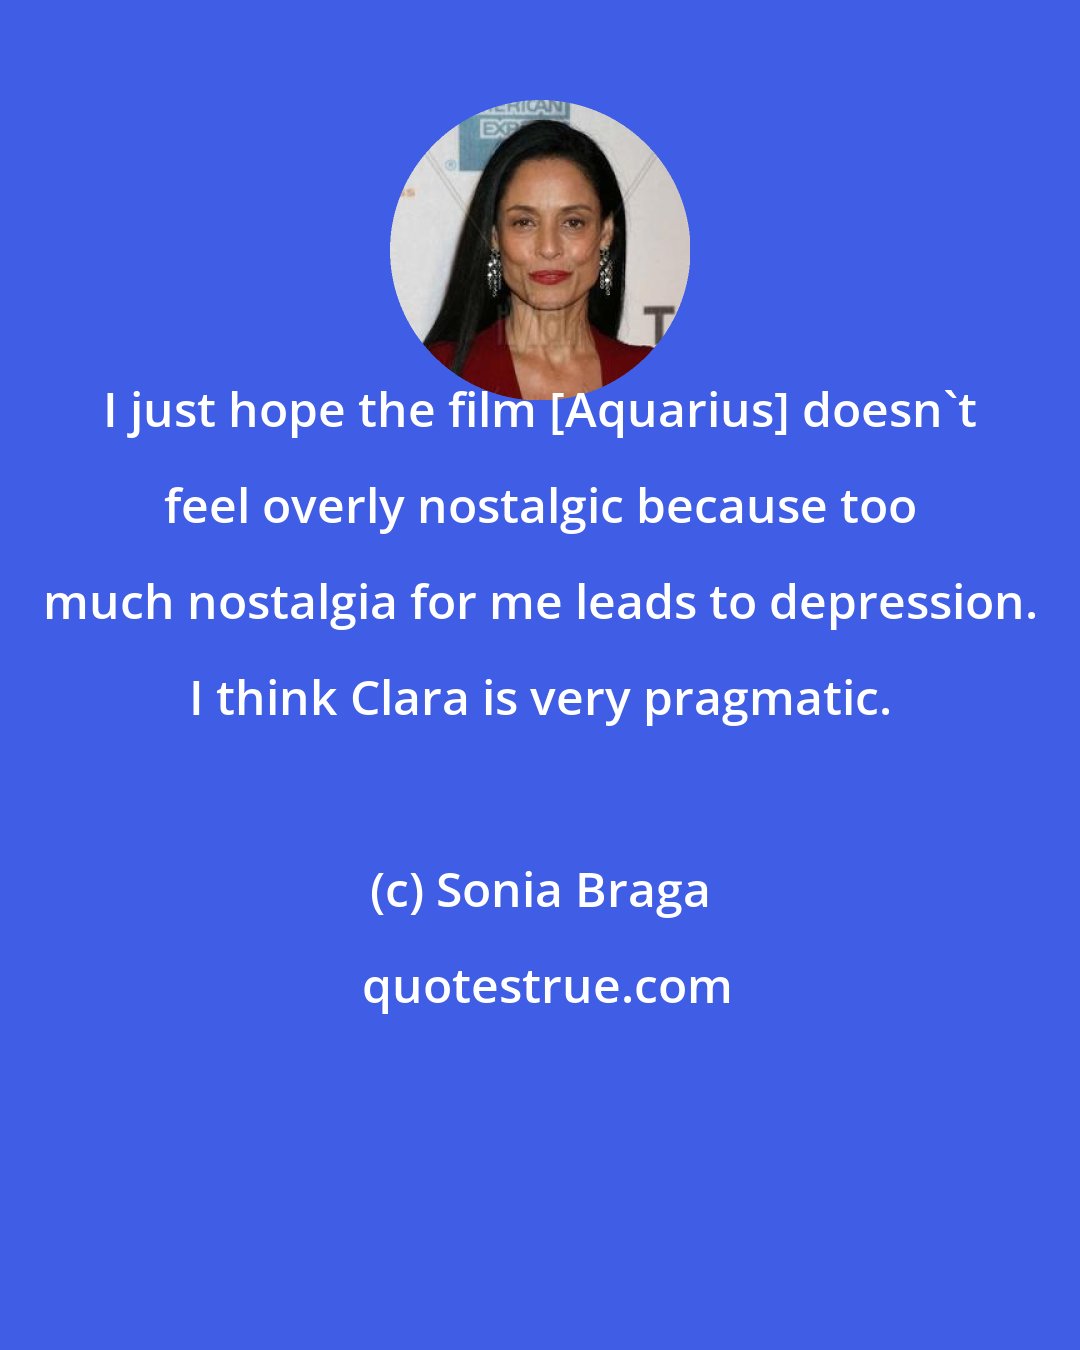 Sonia Braga: I just hope the film [Aquarius] doesn't feel overly nostalgic because too much nostalgia for me leads to depression. I think Clara is very pragmatic.